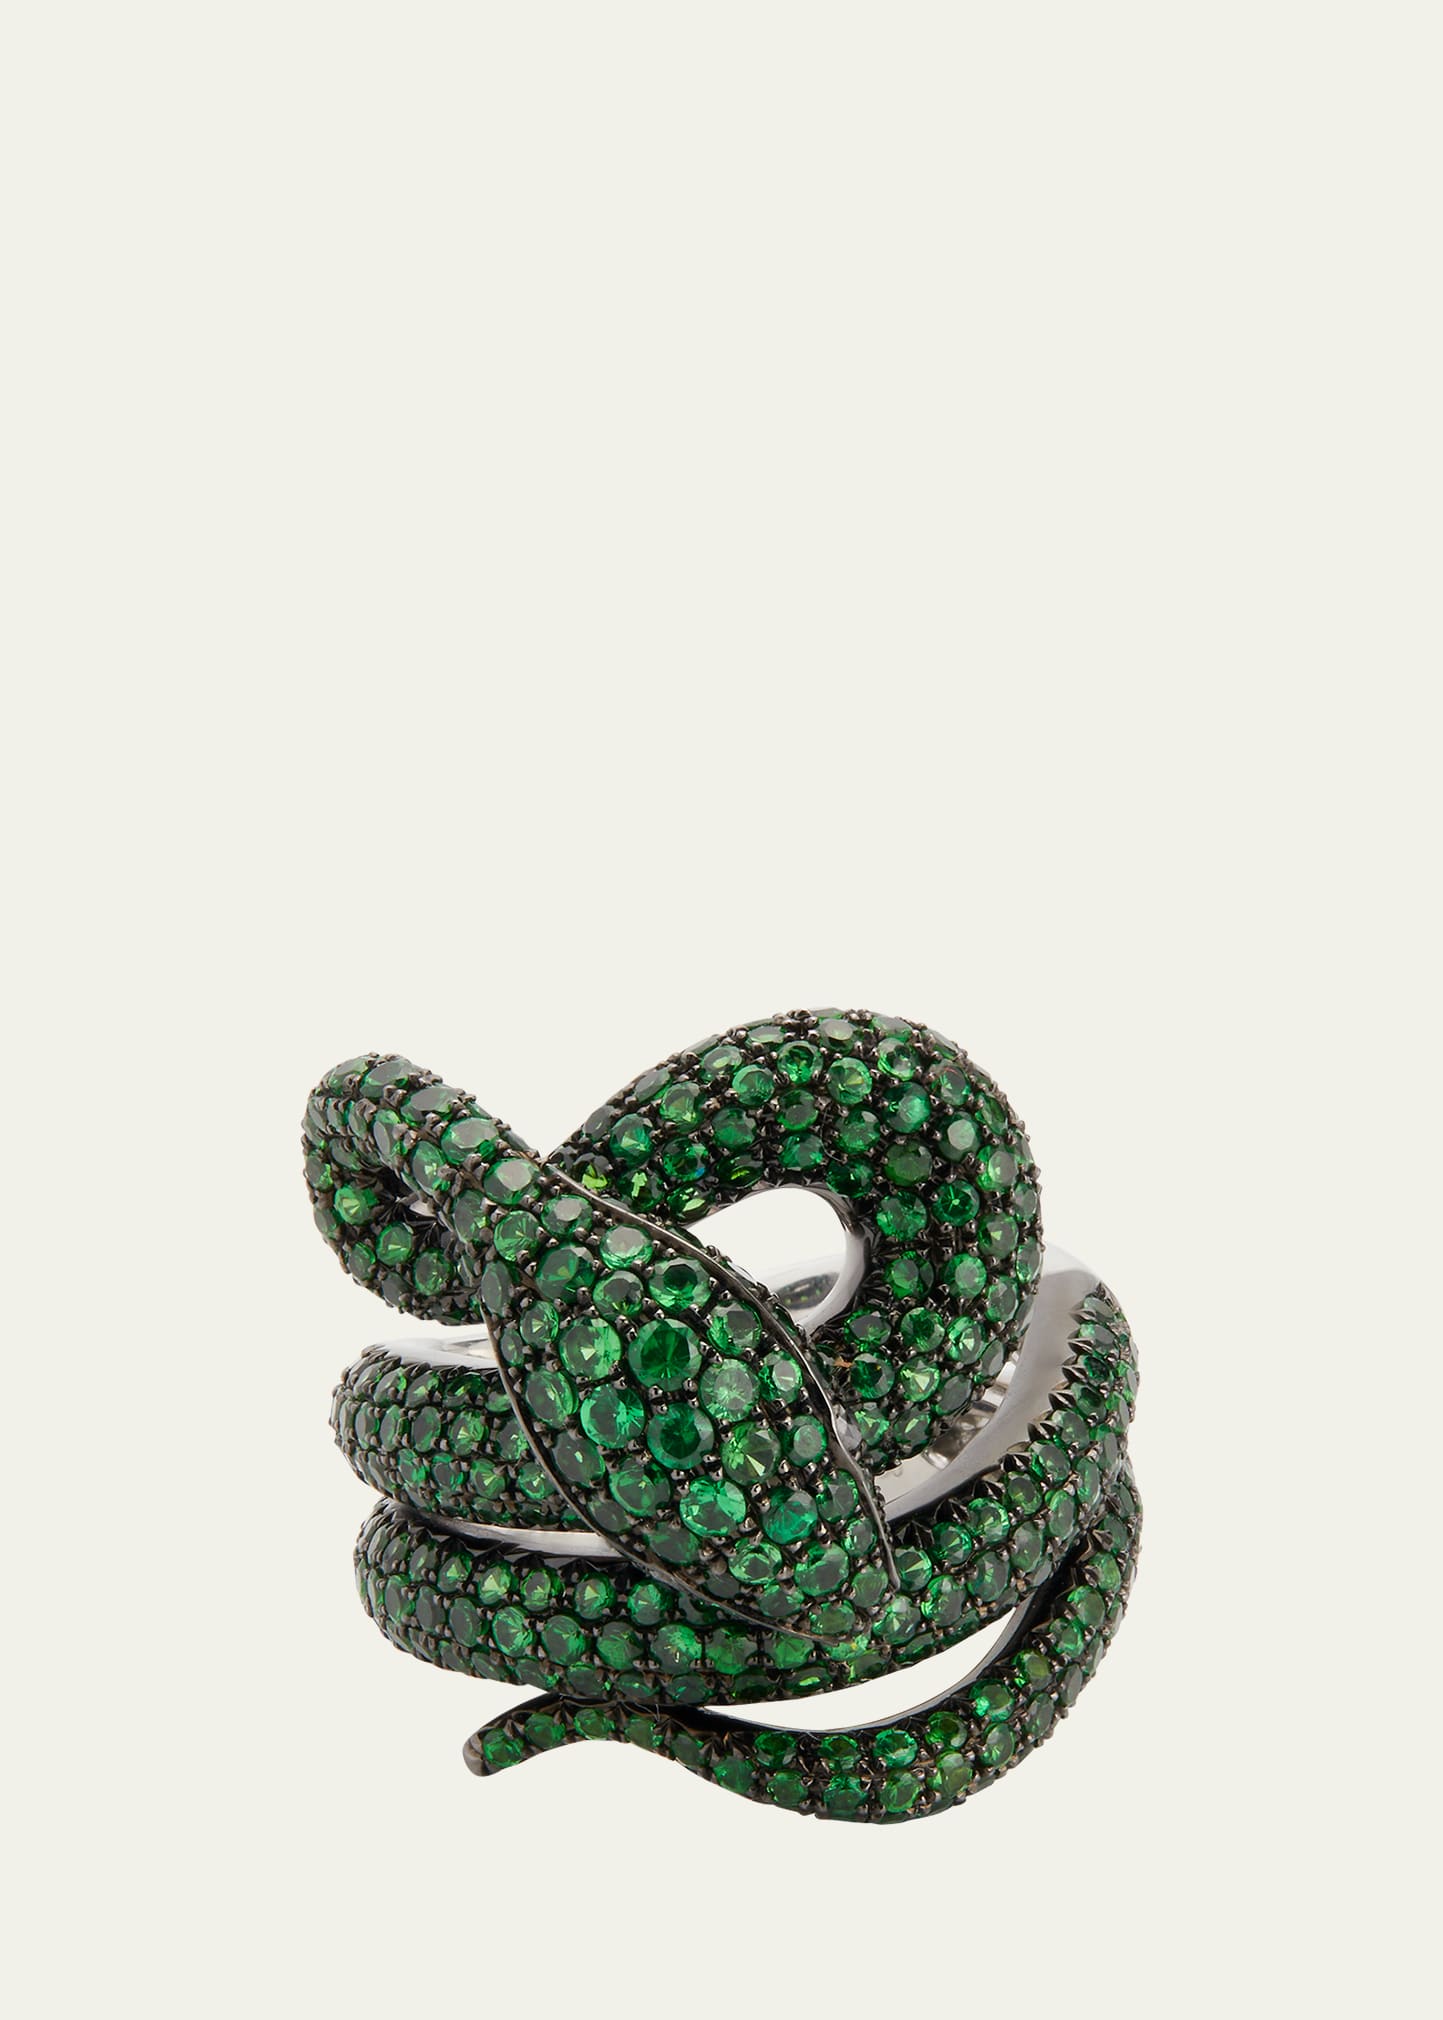 18k White Gold Green Ring from the Snake Collection, Size 7